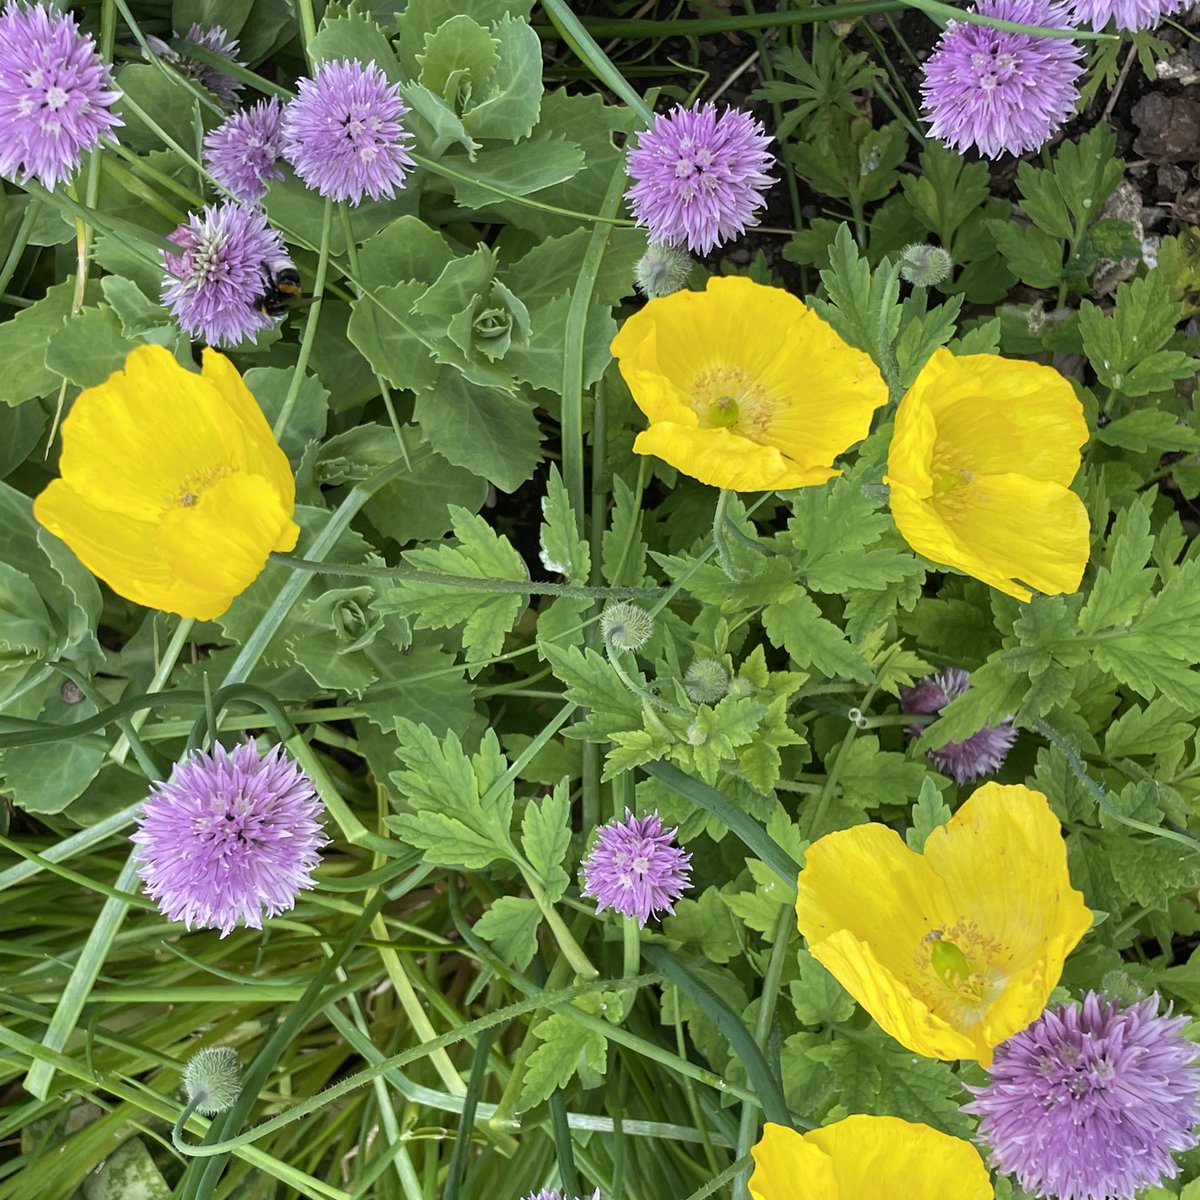 It’s Sunday and the sun is shining in Devon! A gardening day beckons! These cheerful yellow poppies self seed everywhere in my Devon garden— here amongst the chives. #SundayYellow #gardening #poppies